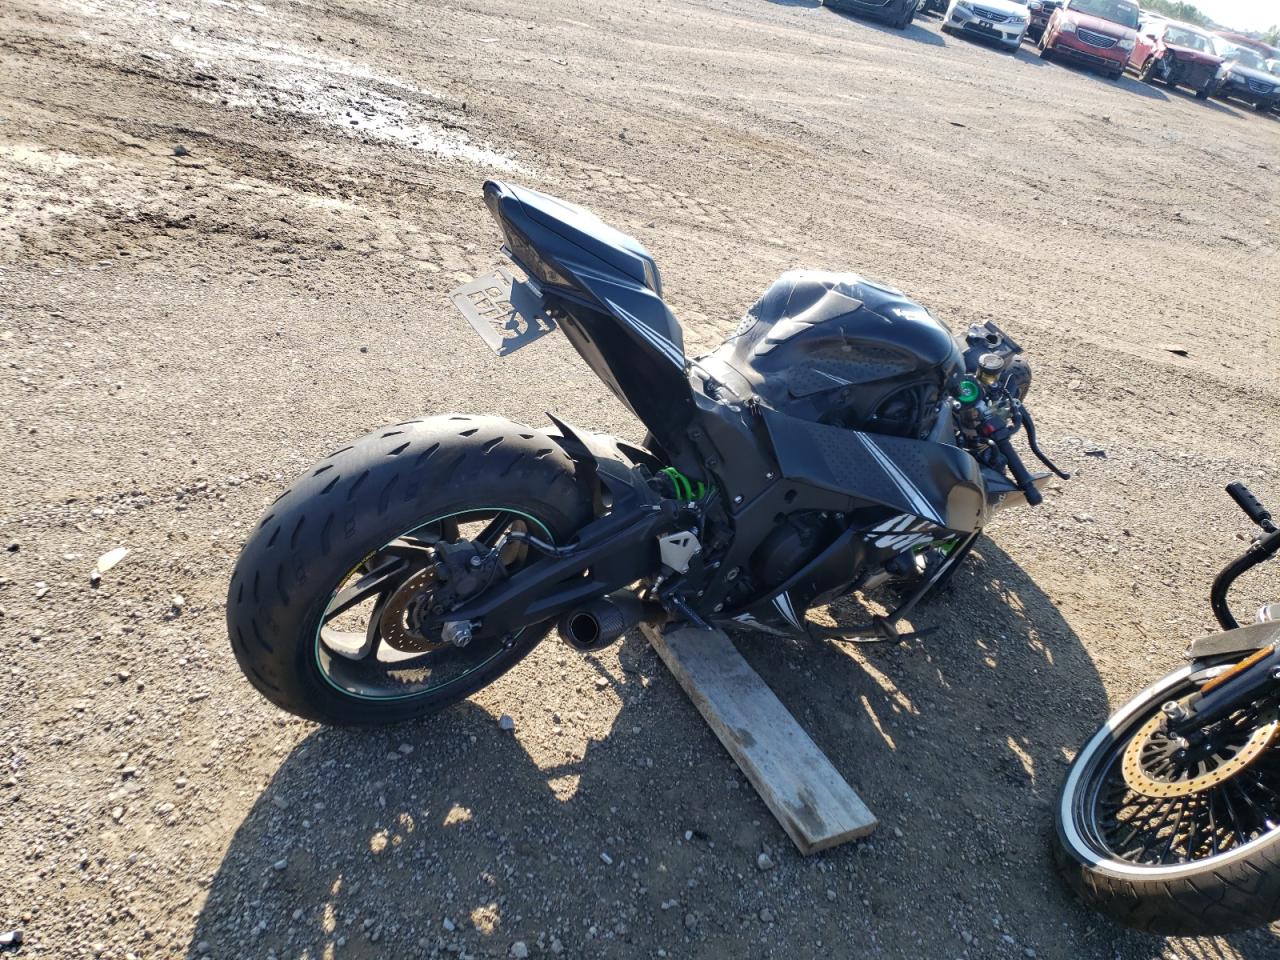 2018 Kawasaki ZX1000 Z for sale at Copart Chicago Heights, IL Lot 